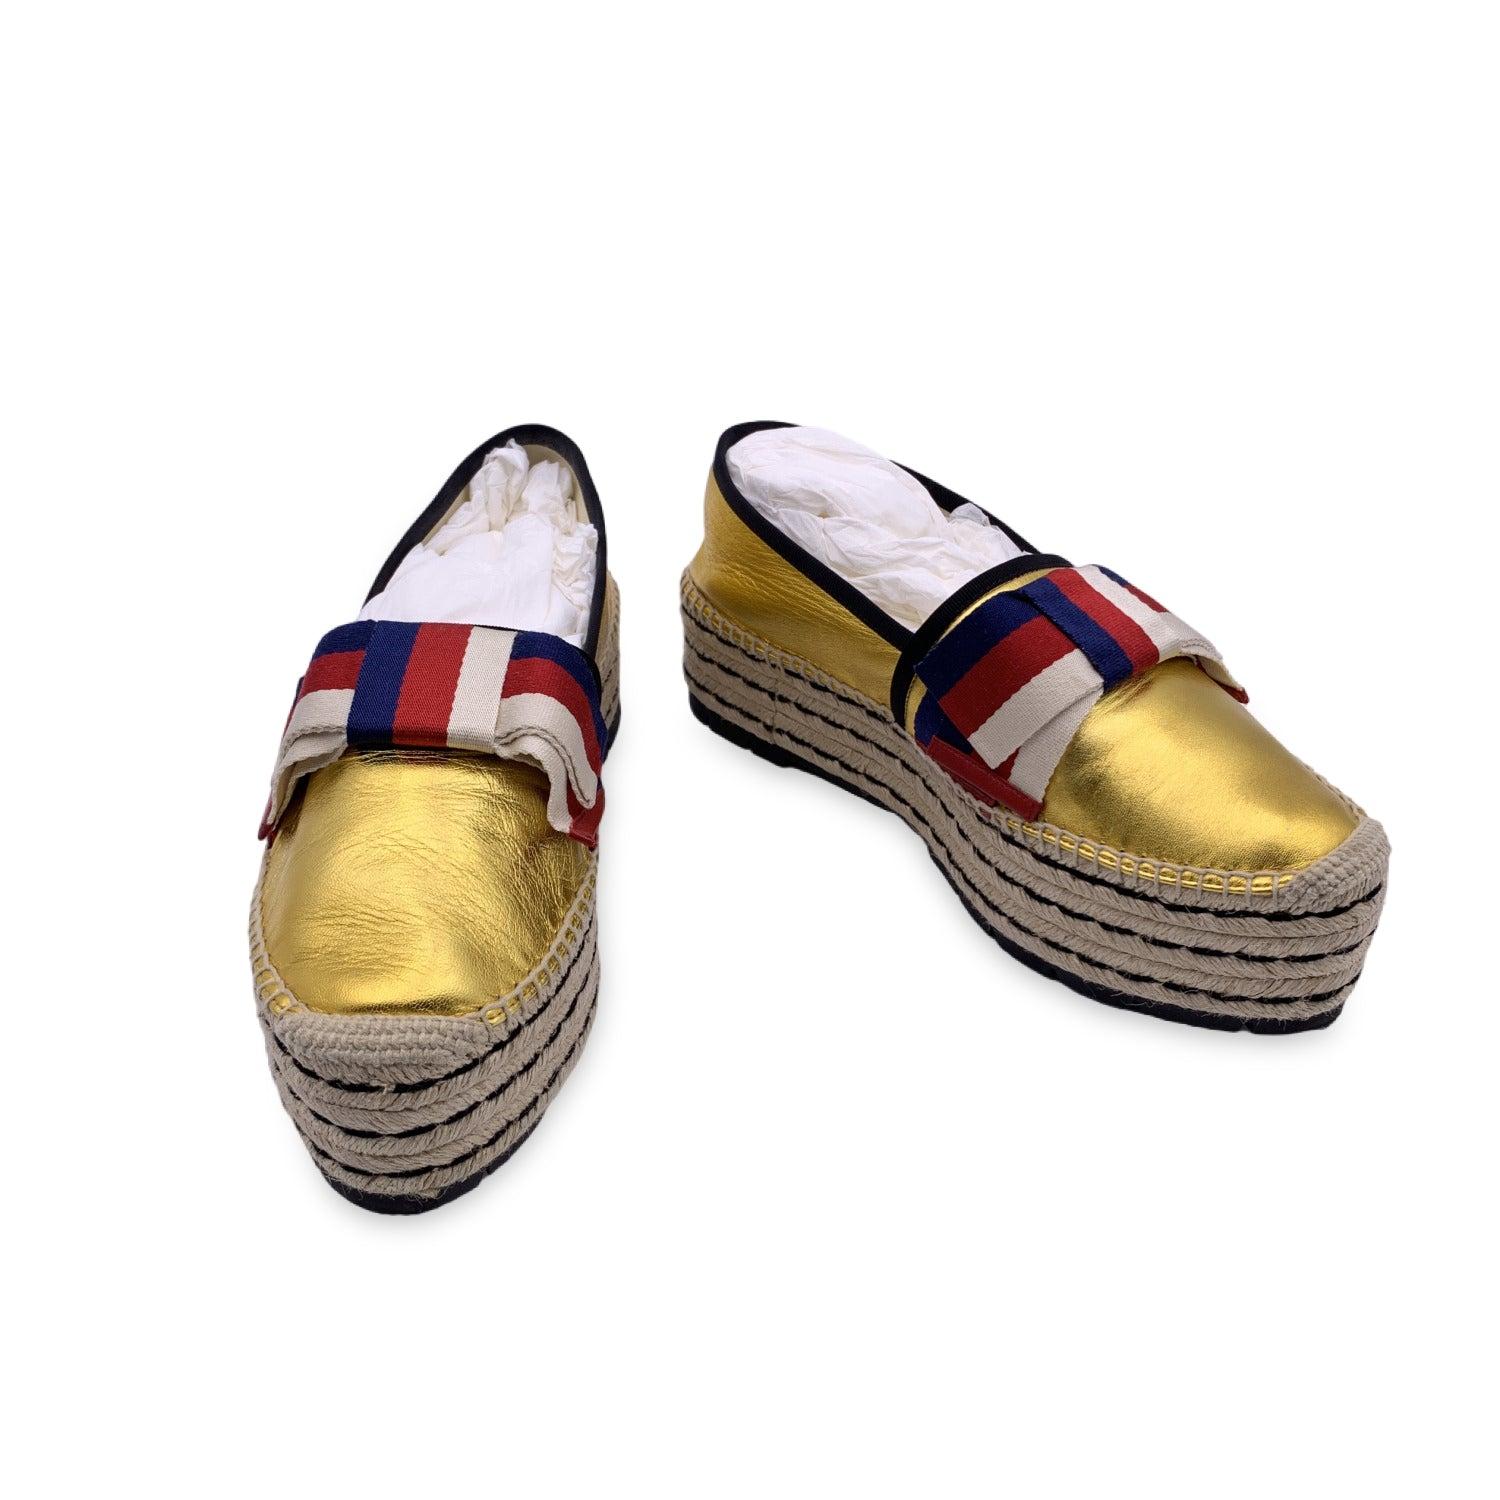 Gucci Gold Leather Sylvie Web Bow Espadrilles Platform Shoes Size 41 In Excellent Condition For Sale In Rome, Rome